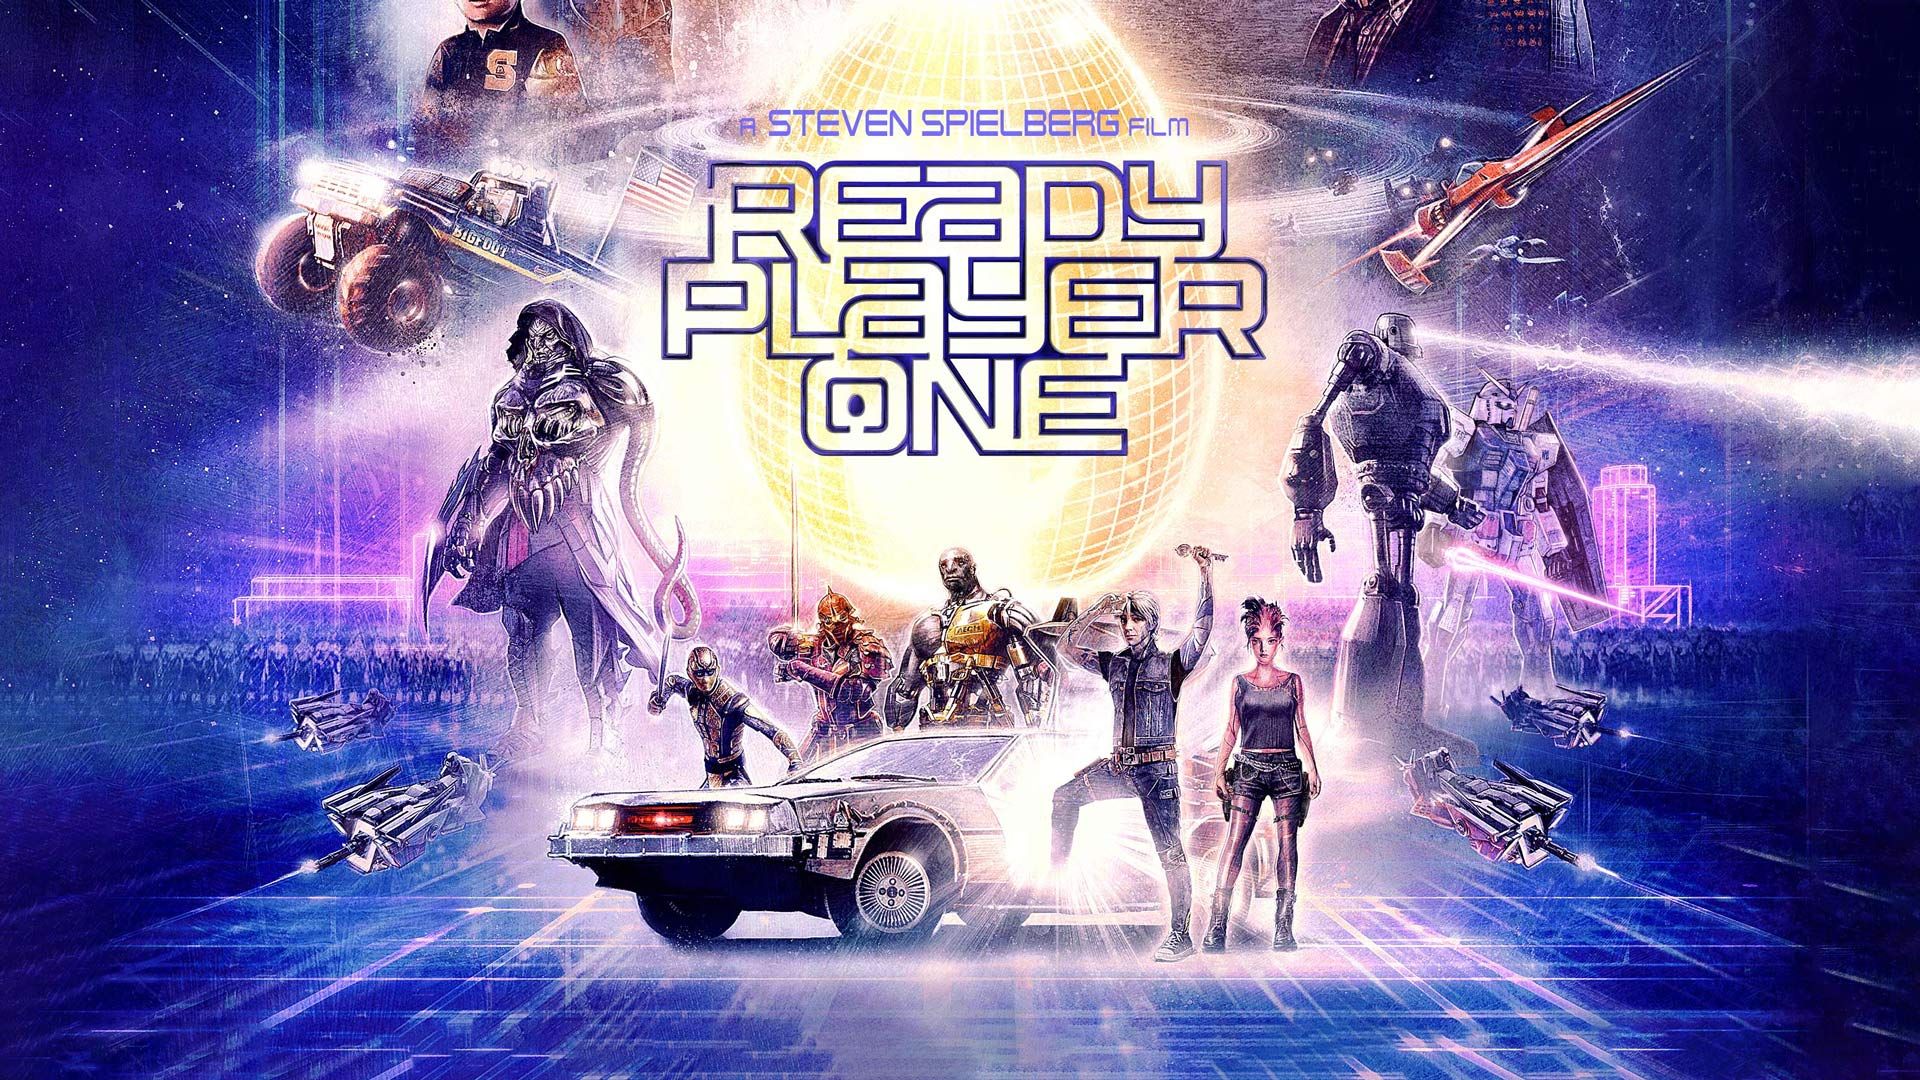 Pure Imagination By Ghostwriter Music (Ready Player One Trailer Music)